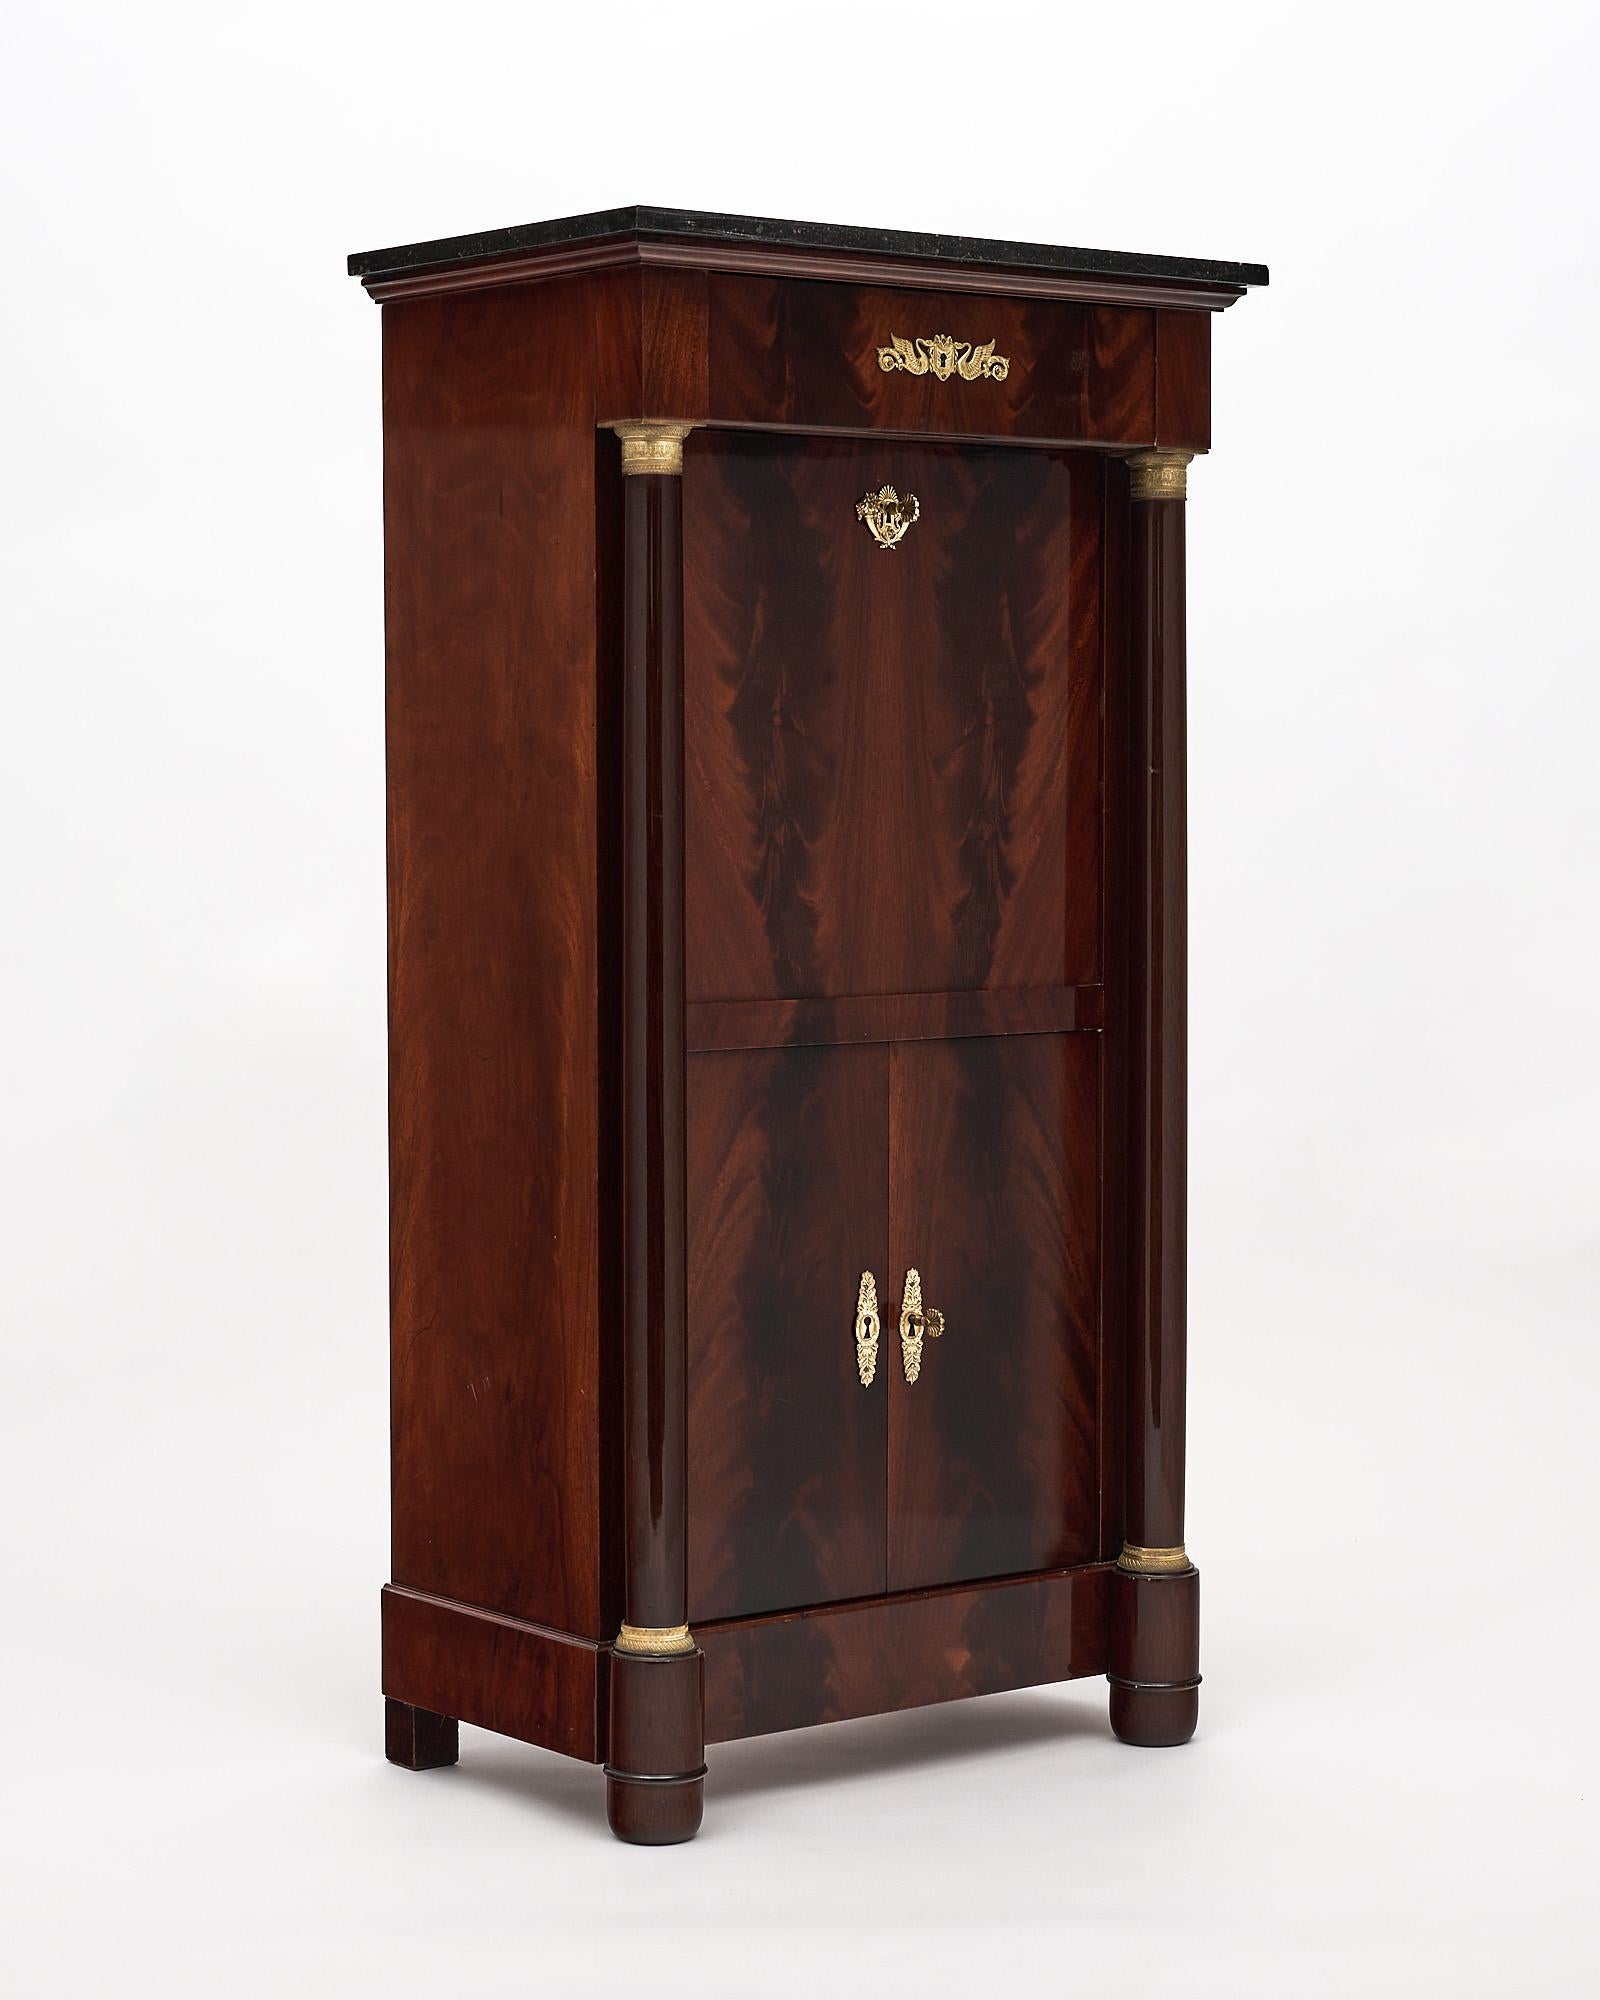 Secretary, French, in the Empire style and made of Cuban flamed Mahogany, finished in a Museum quality French polish. The exquisite cabinet boasts two detached columns with finely cast bronzes throughout. The drop front opens to an original red